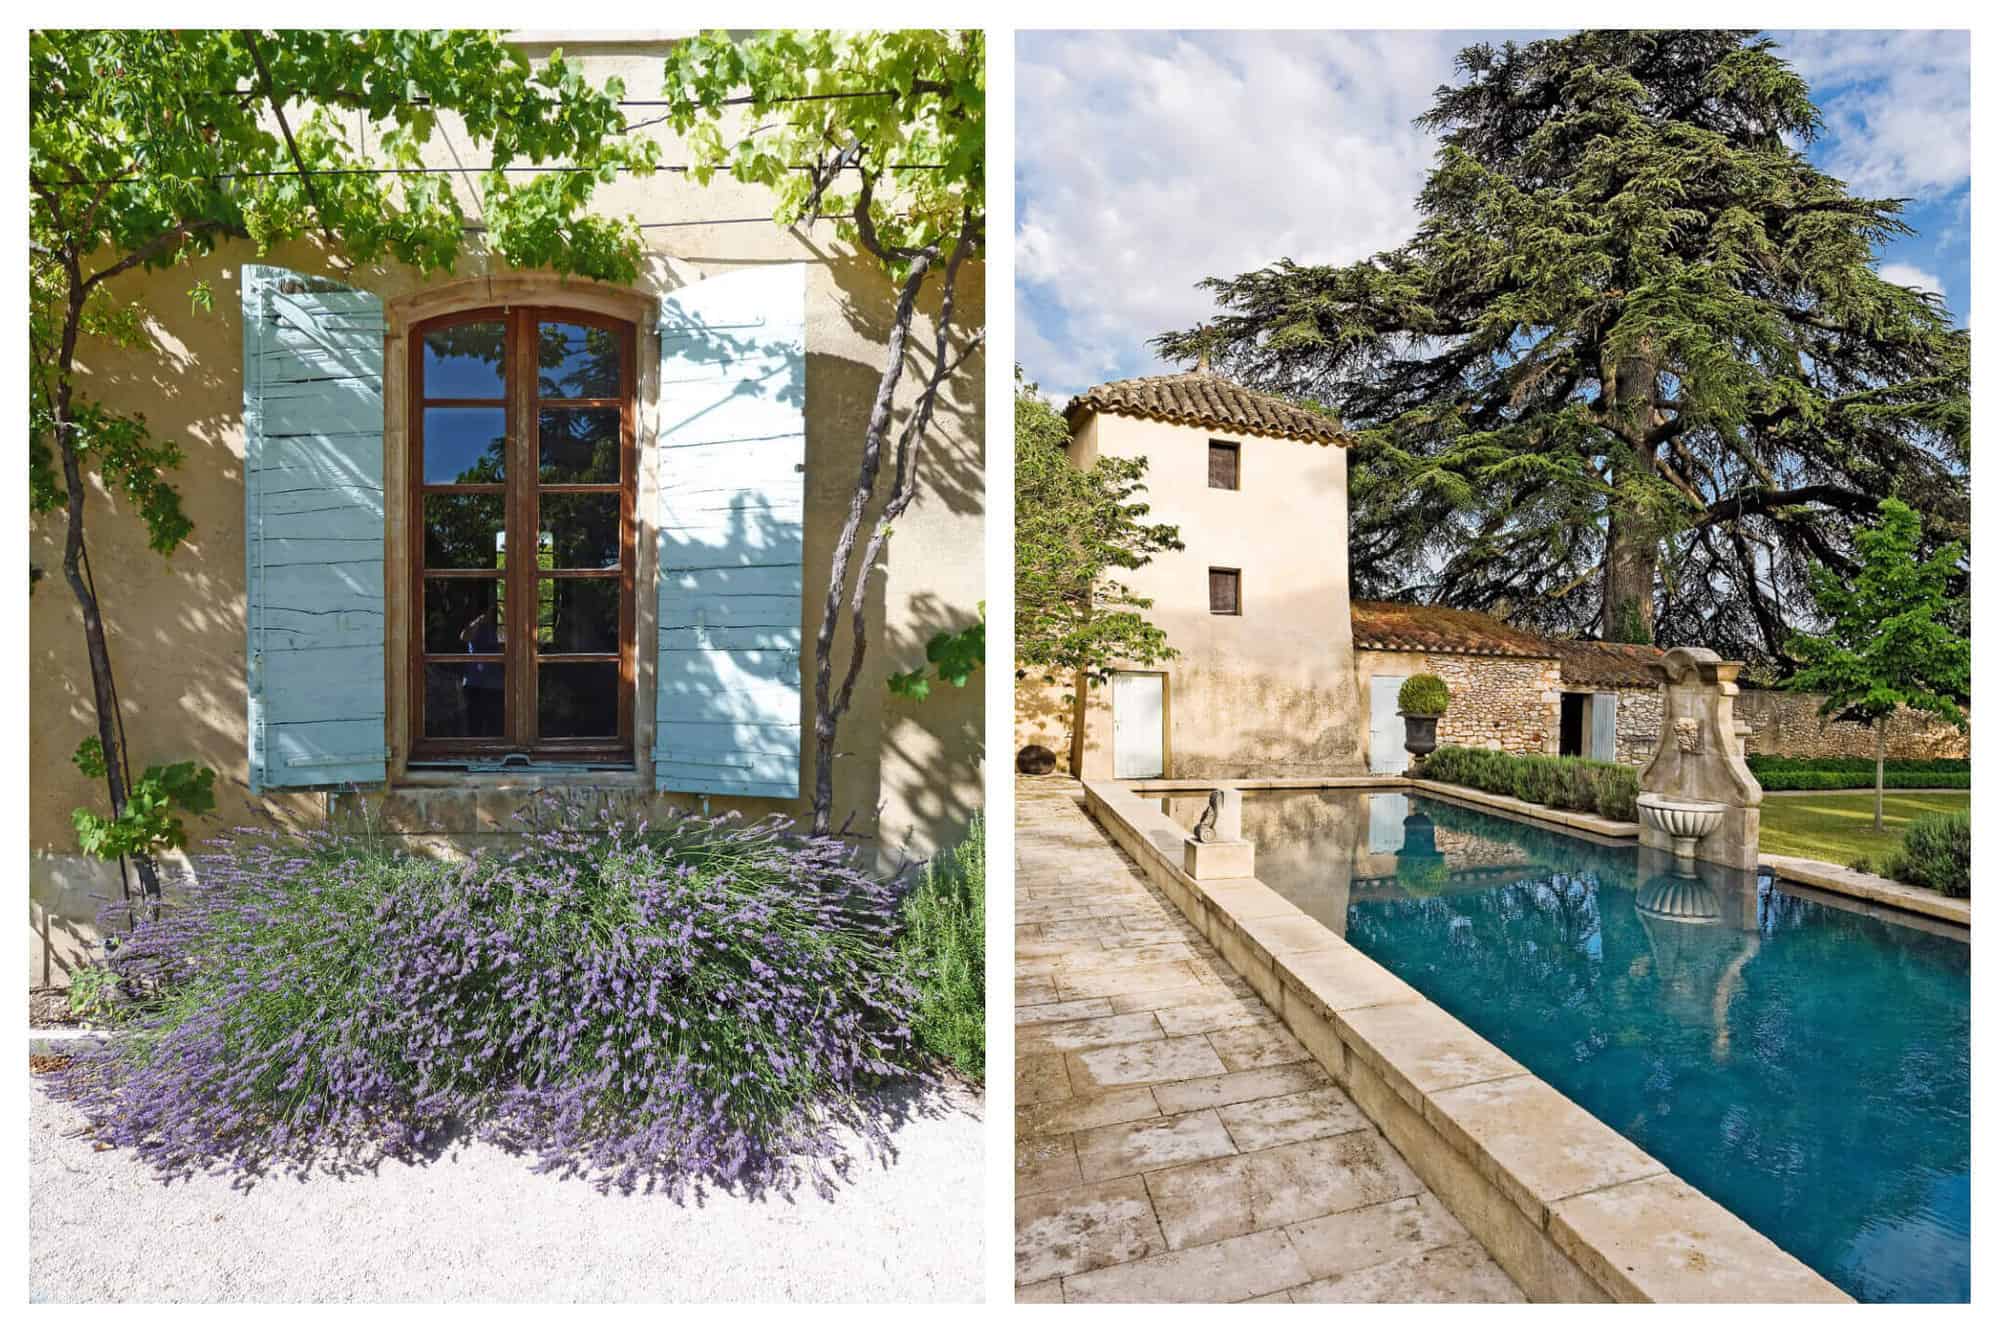 A blue shuttered window at St Saturnin with lavender growing underneath. The long blue pool with interesting stone features and a large tree in the background.